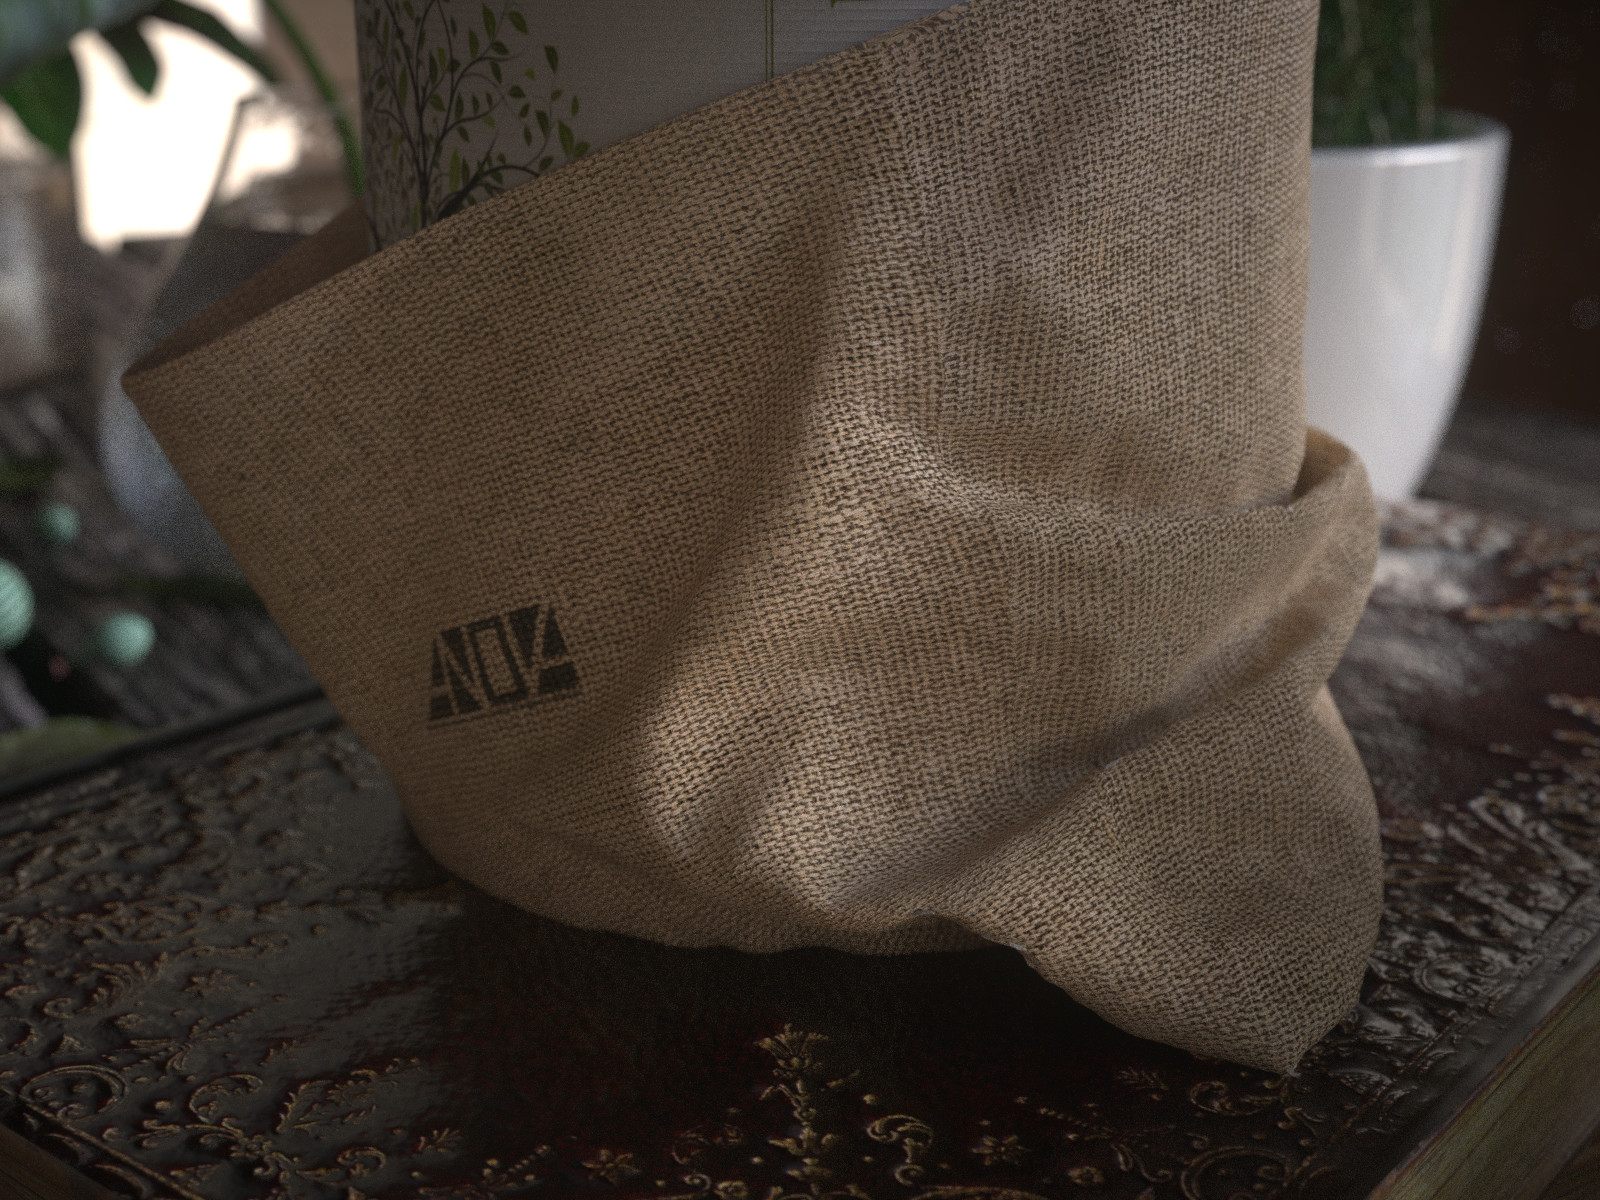 Sack Modeling for Still Life Project